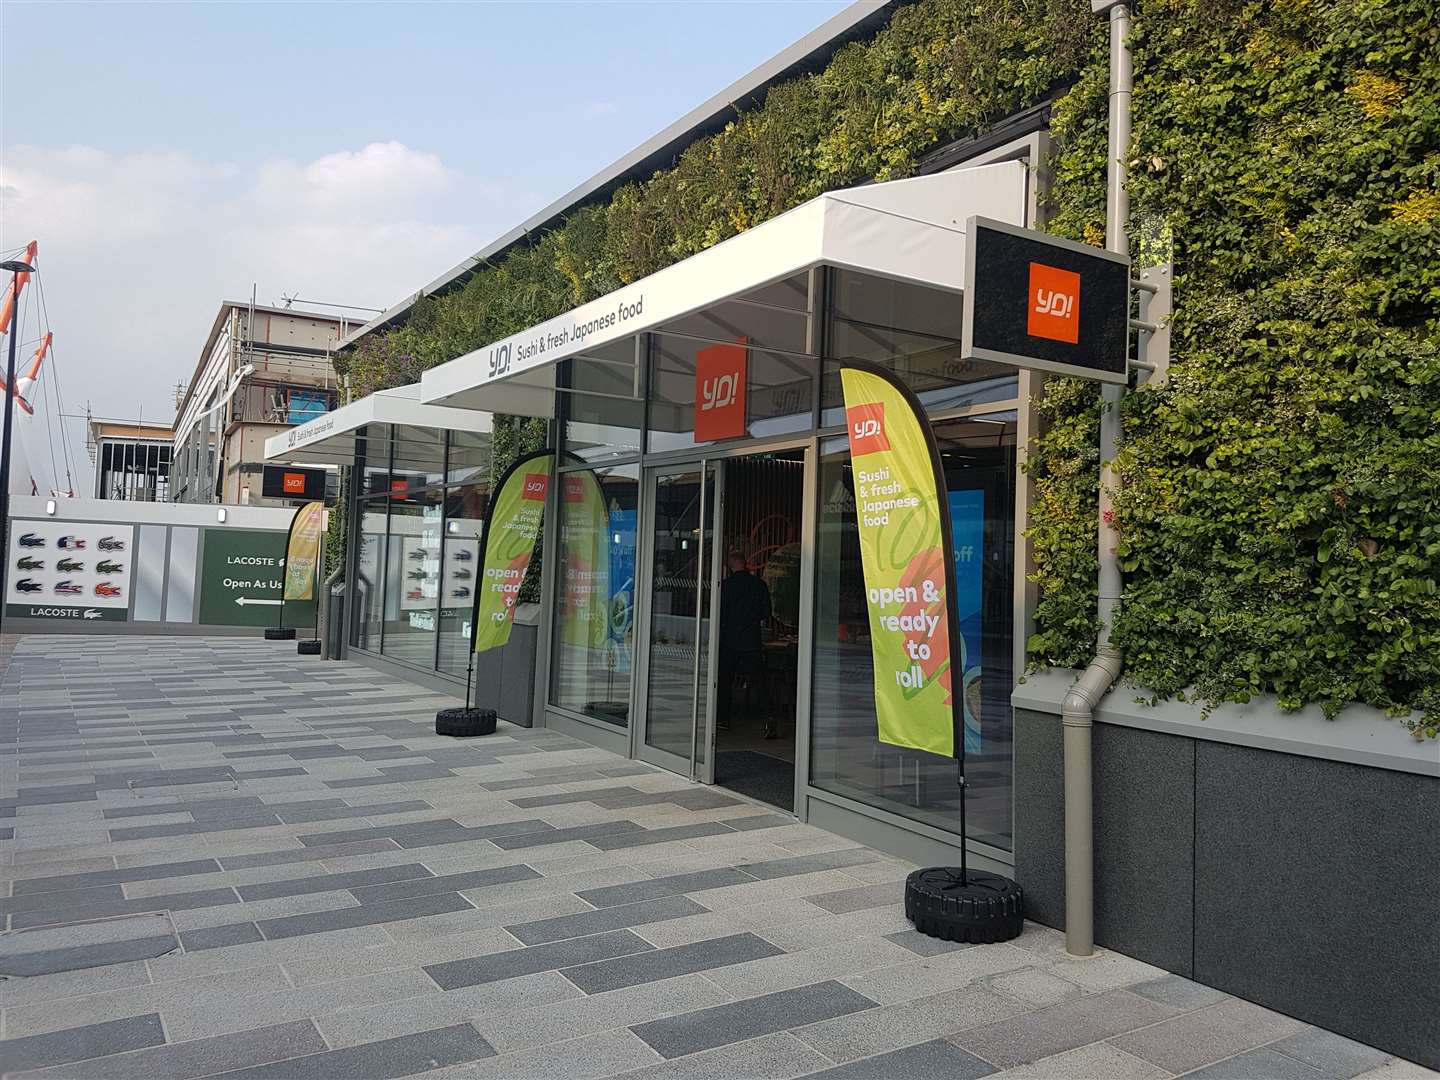 The exterior of the new YO! Sushi branch features part of a living wall which will cover the Ashford Designer Outlet's extension. (10794764)